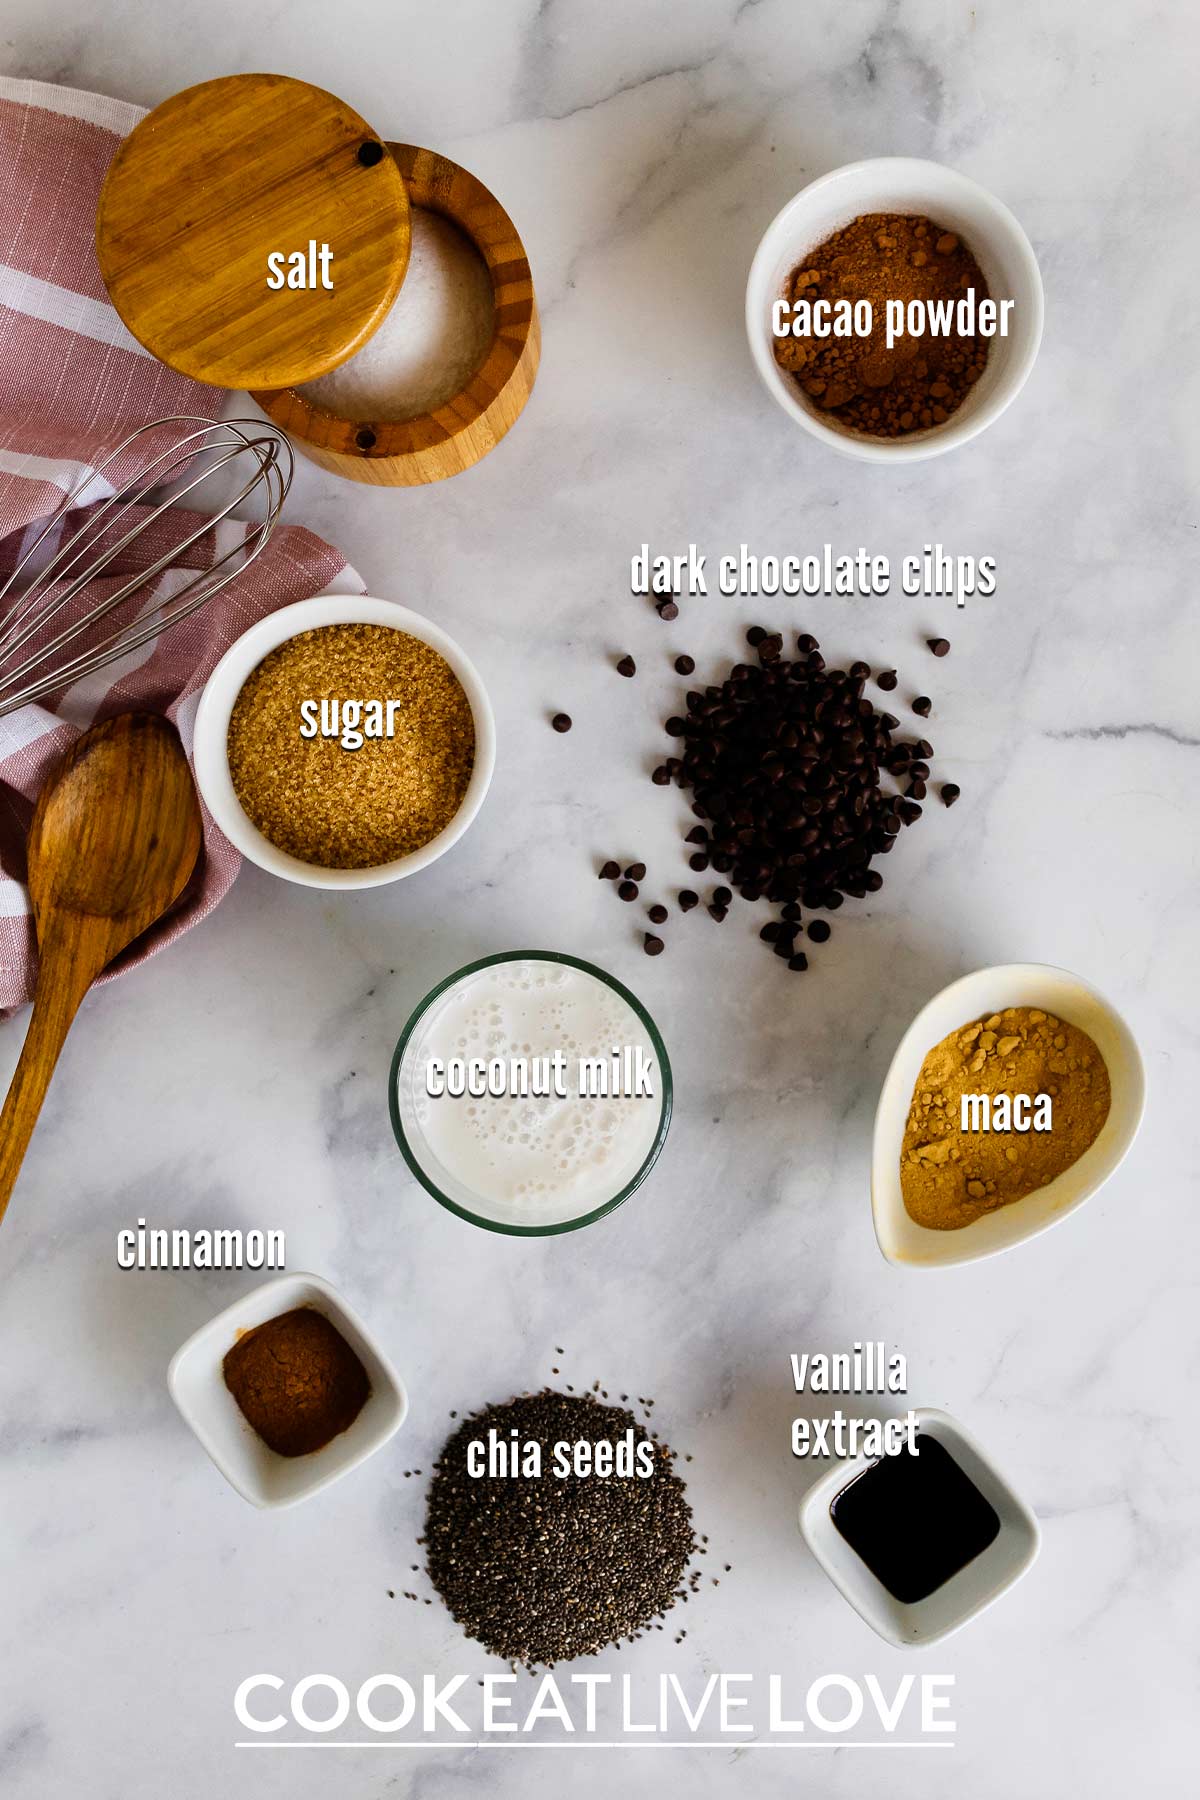 Ingredients to make chocolate chia pudding: salt, cacao powder, dark cacao chips, maca, vanilla, chia, cinnamon, coconut milk and sugar on the table.